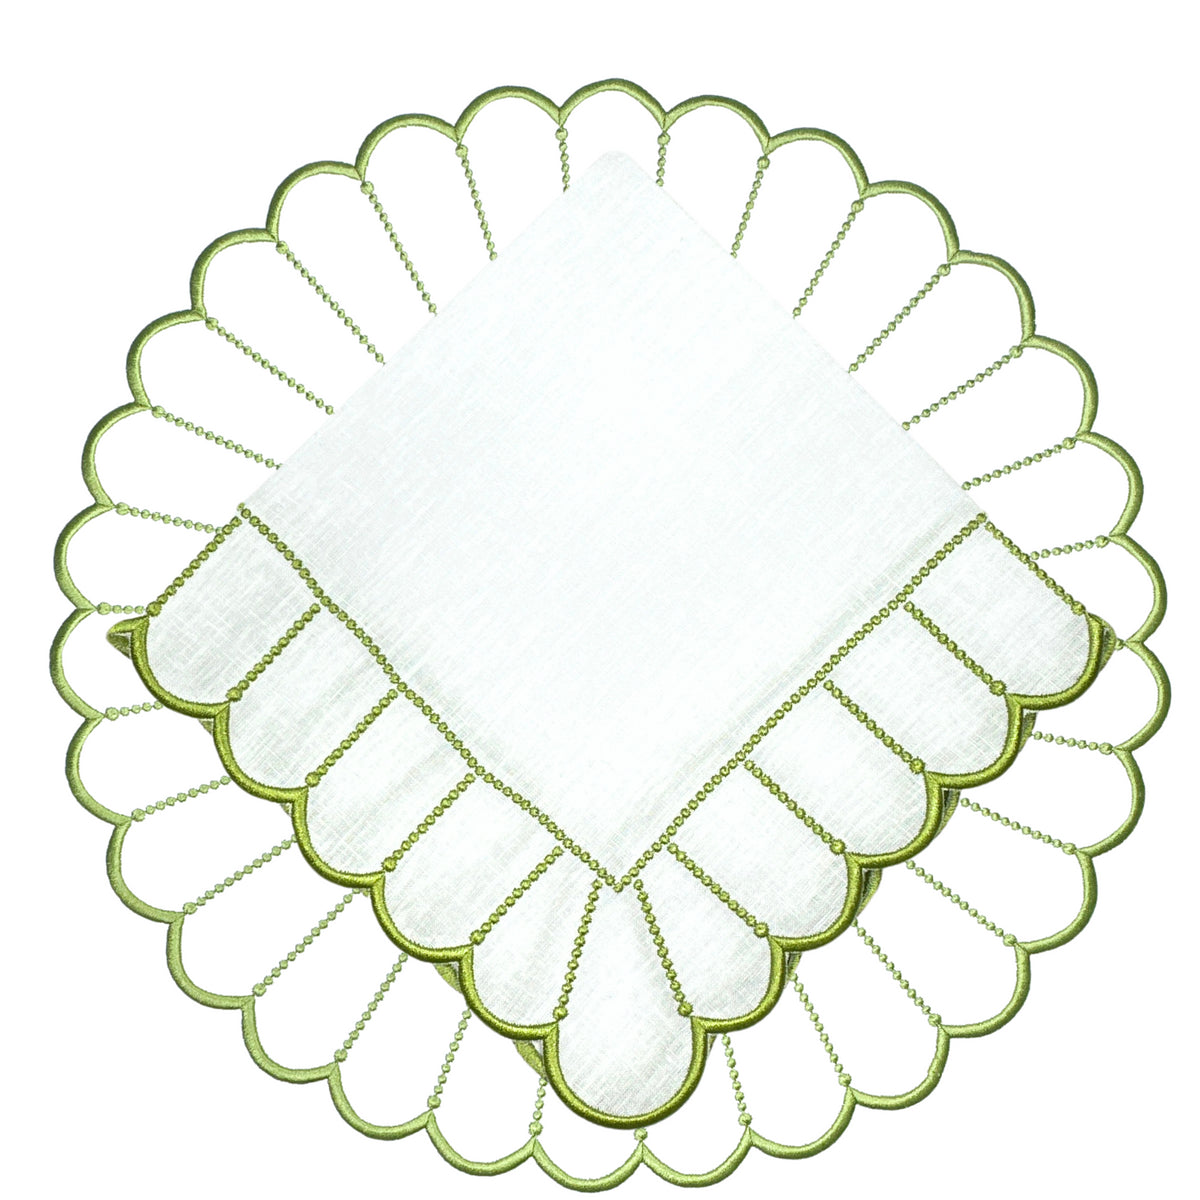 Studio Collection Pippa Napkins in White and Green, Set of 4